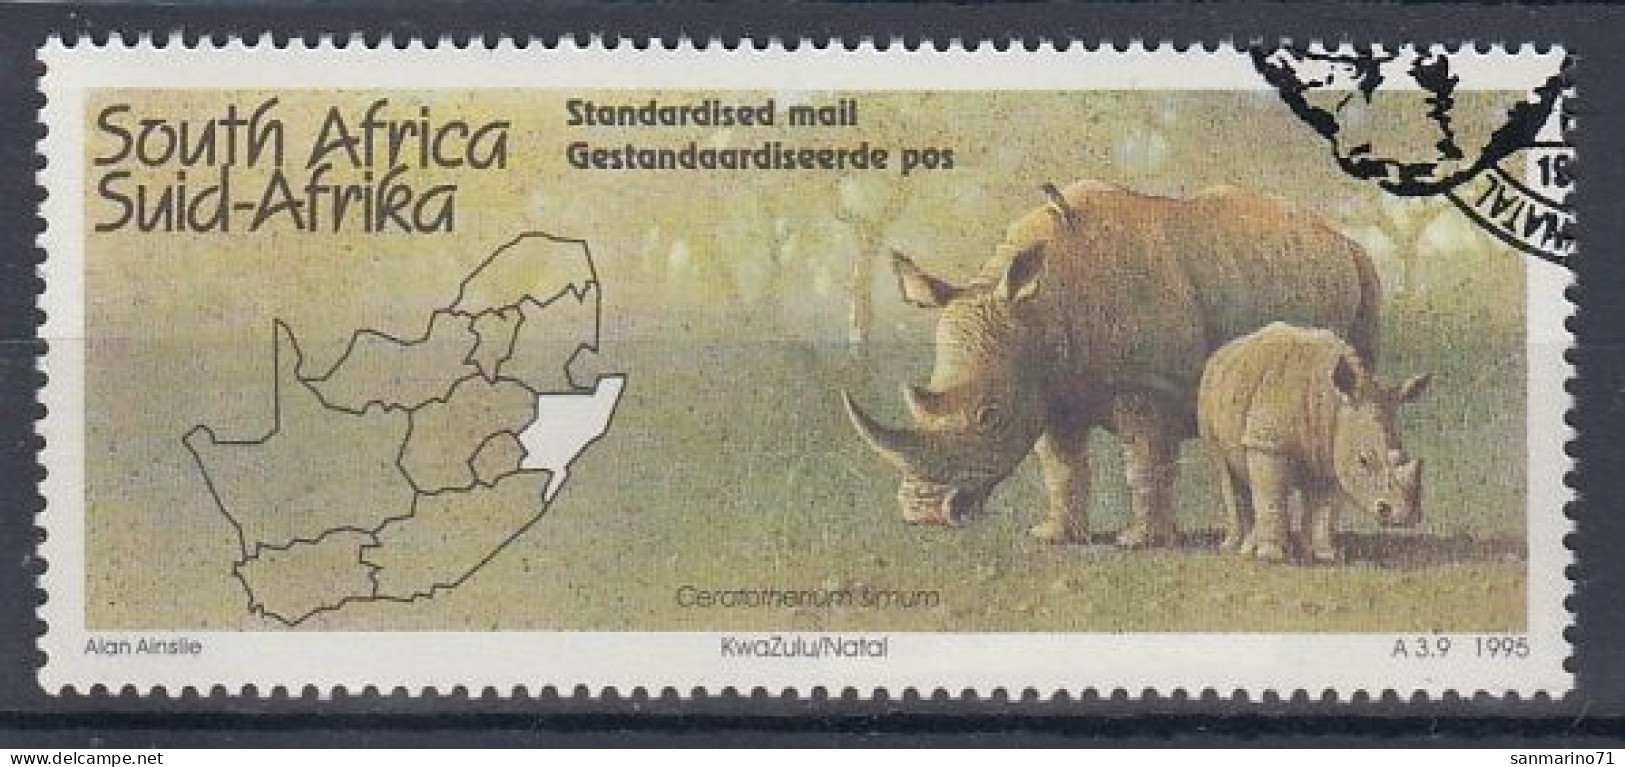 SOUTH AFRICA 954,used - Gebraucht